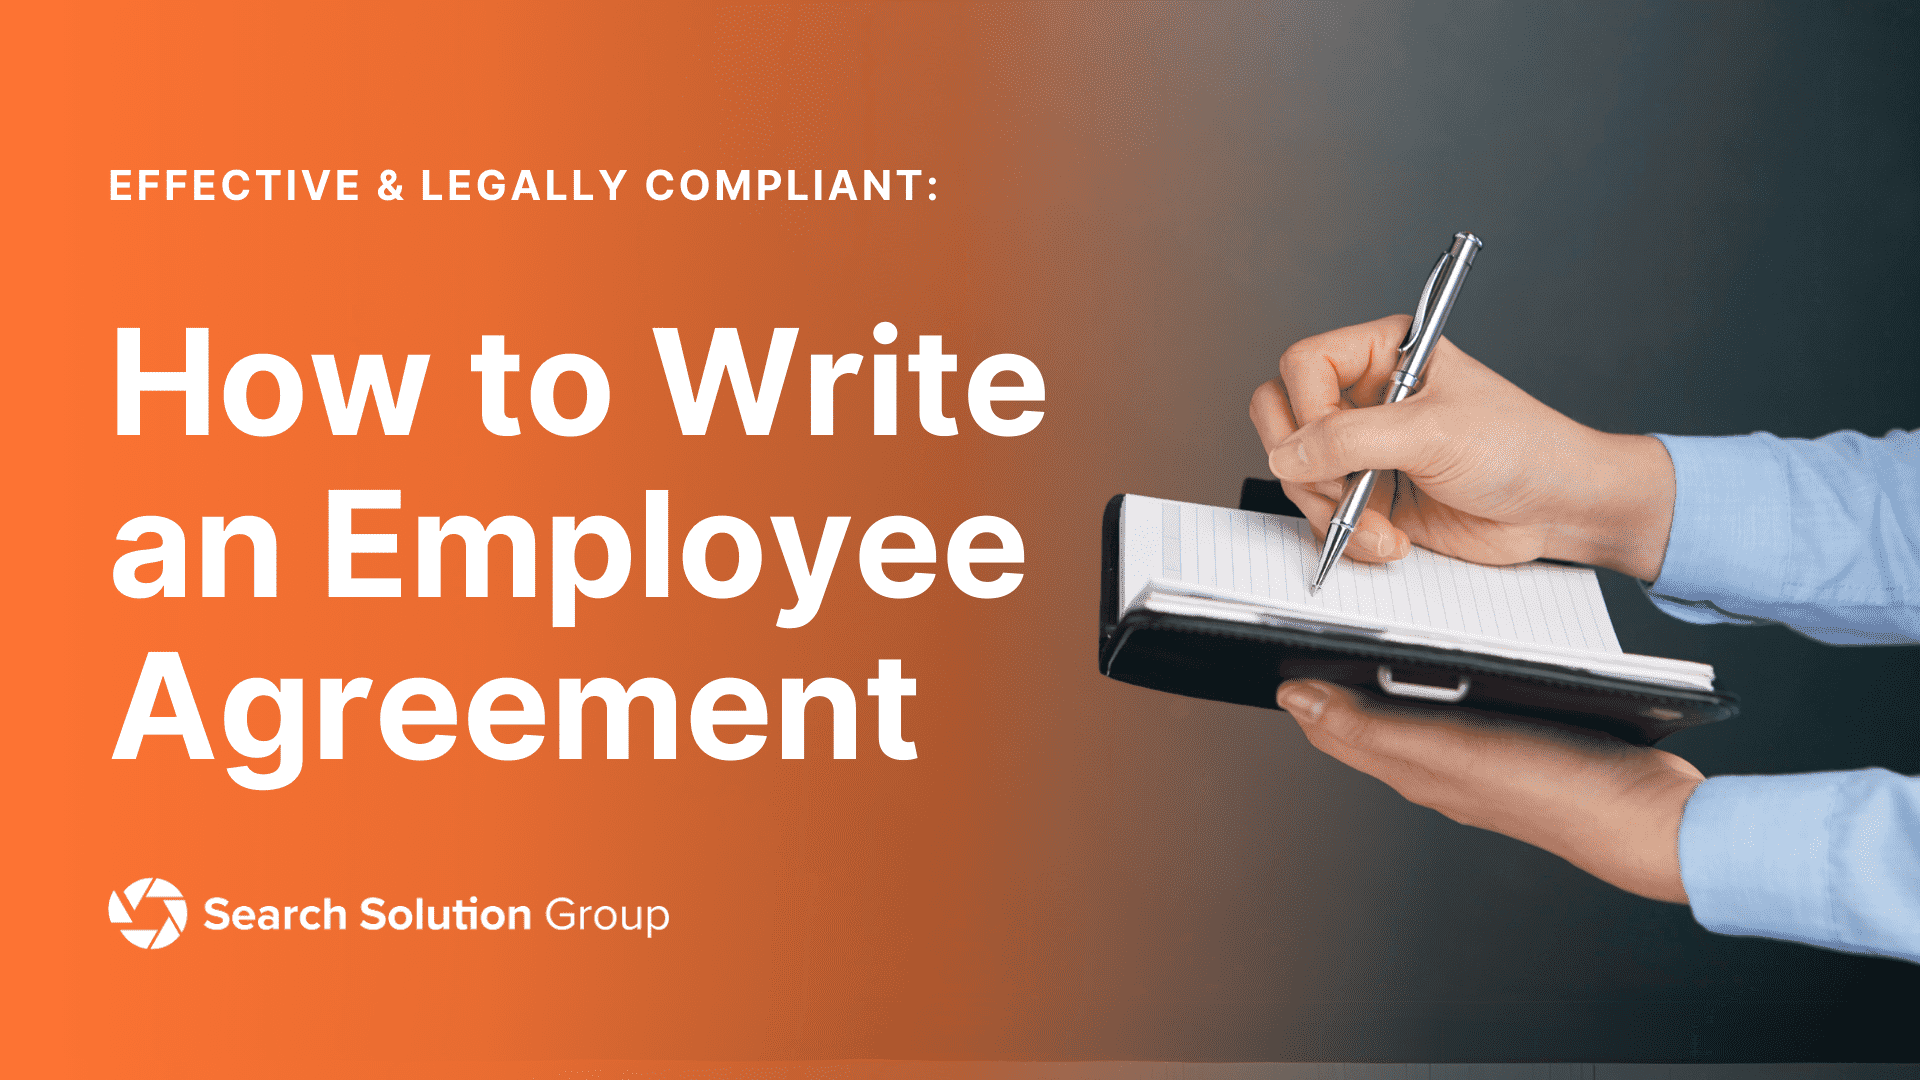 How to Write an Effective and Legally Compliant Employee Agreement